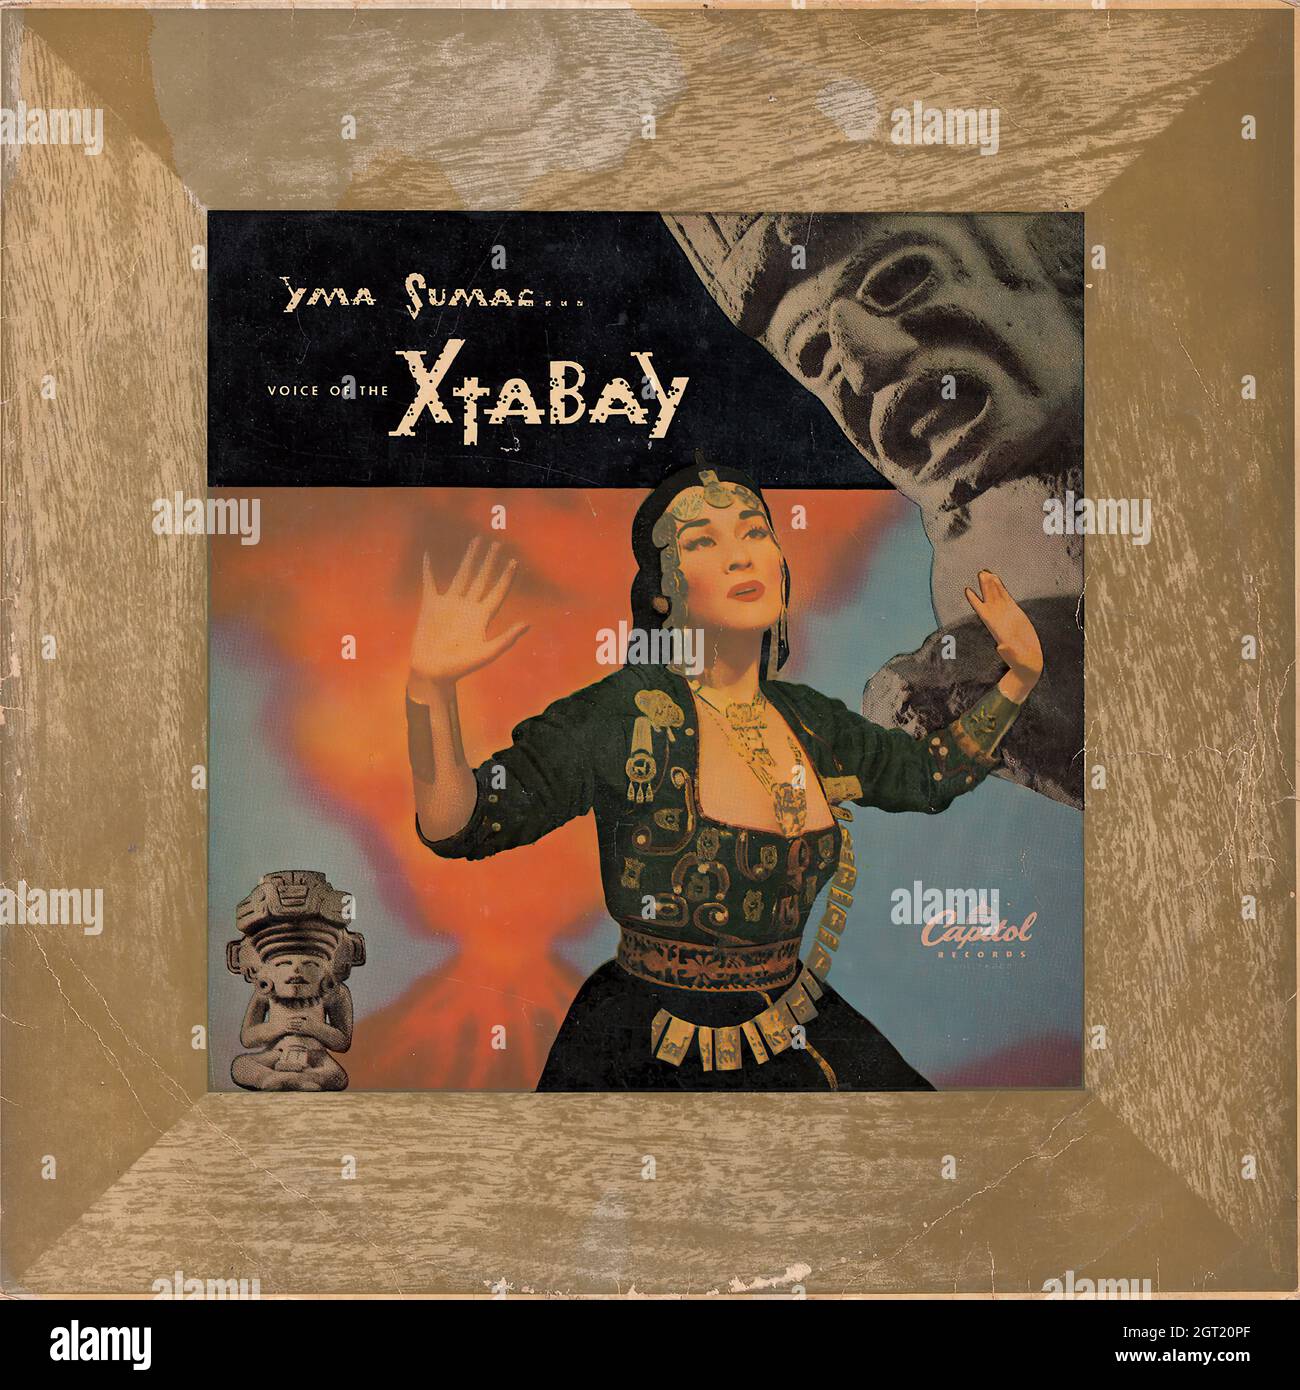 Yma Sumac - Voice of the Xtabay - Vintage Vinyl Record Cover Stock Photo